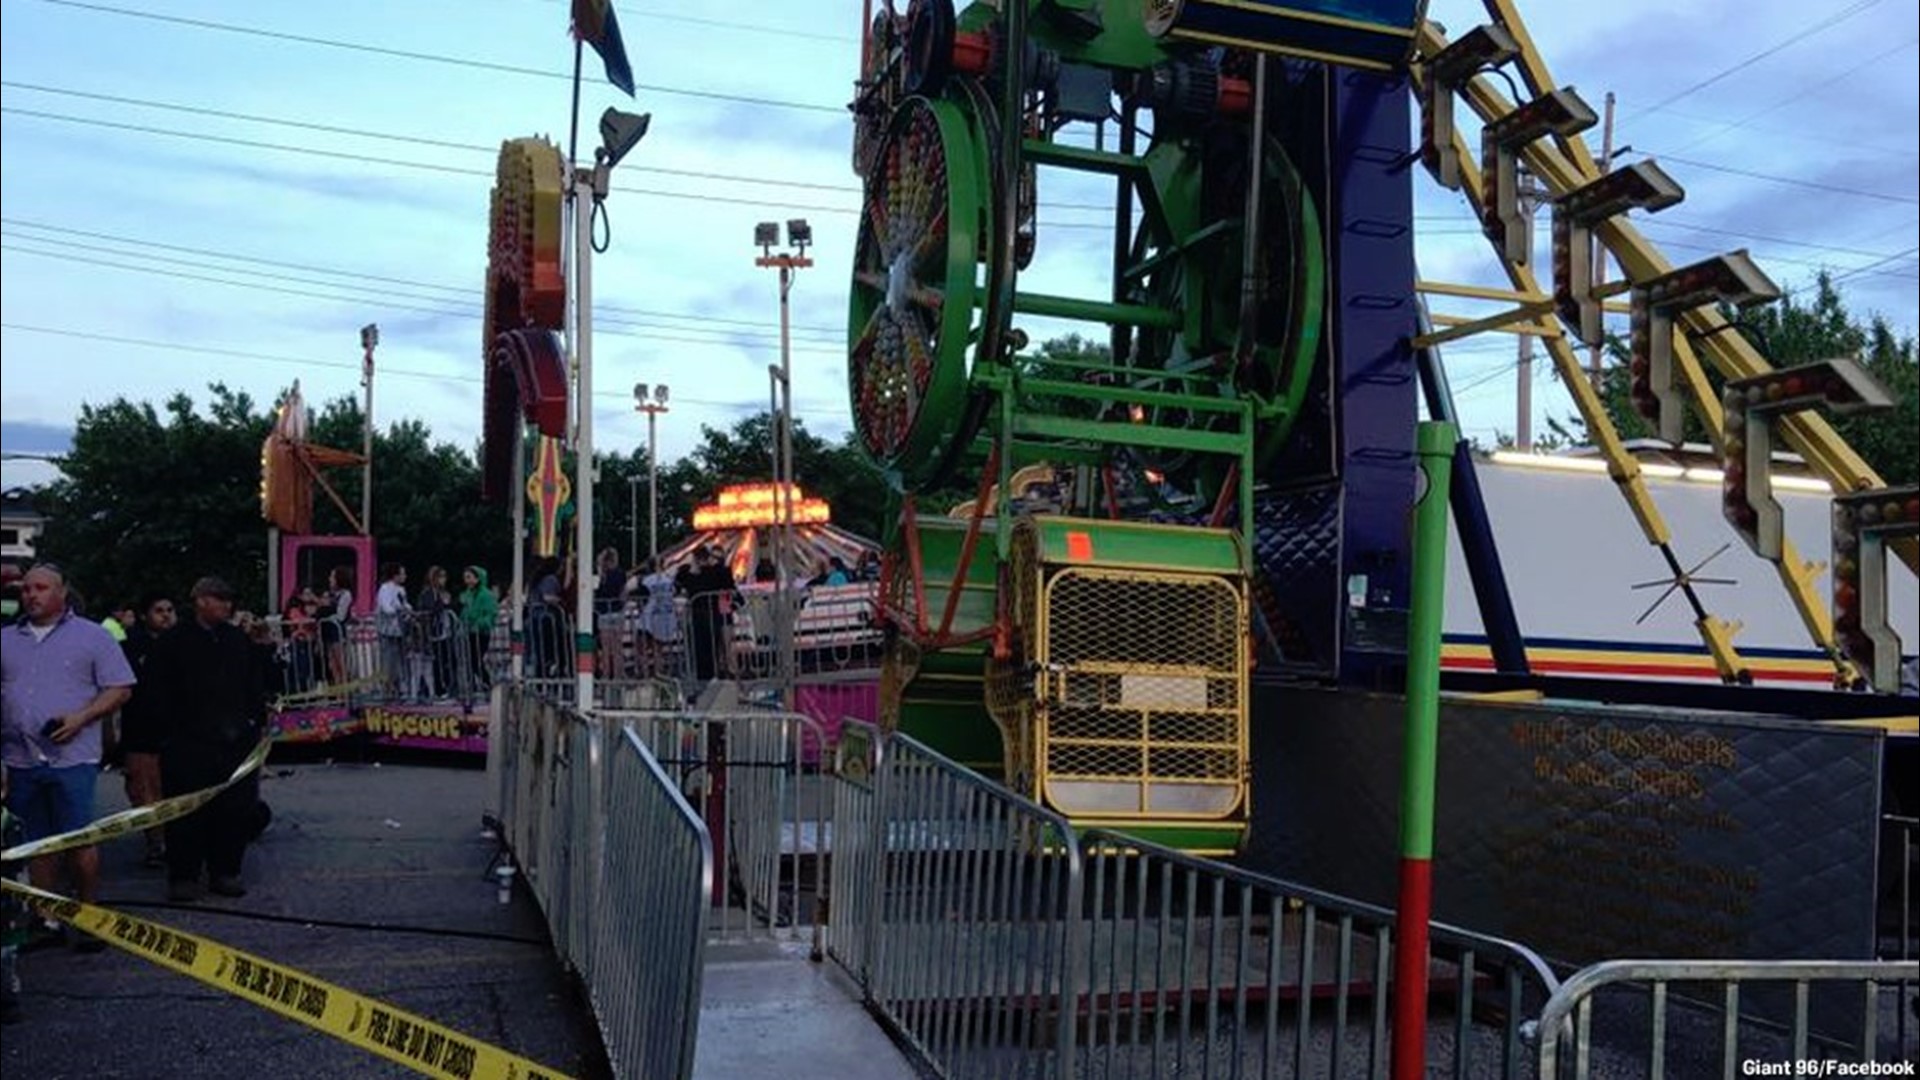 Child seriously injured on carnival ride at Shelbyville festival